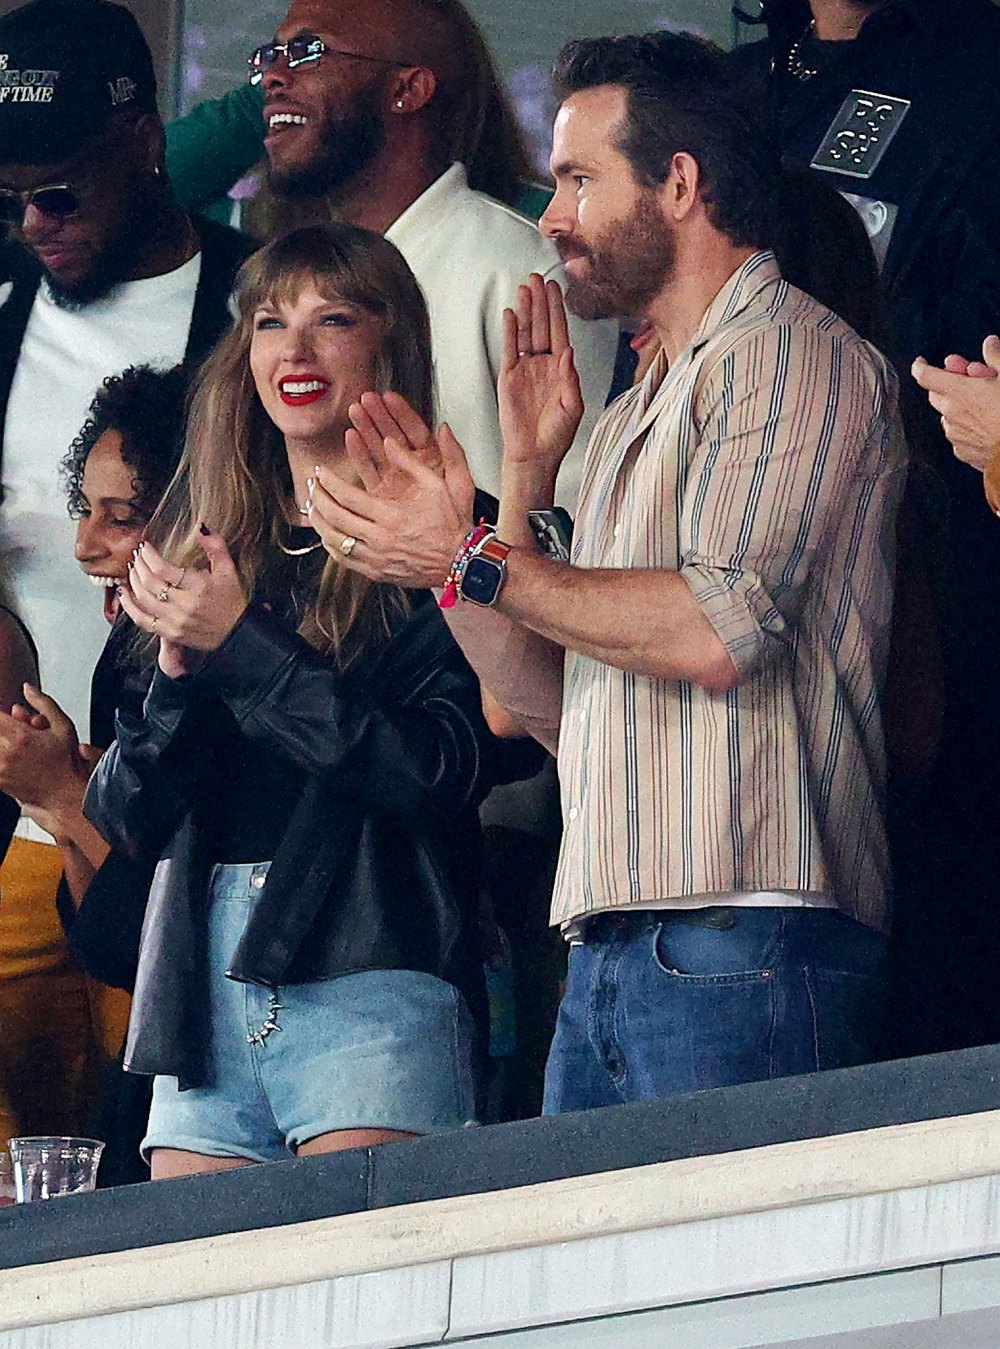 Ryan Reynolds Had A Lot of Fun in Taylor Swift Box at Chiefs Jets Game 2